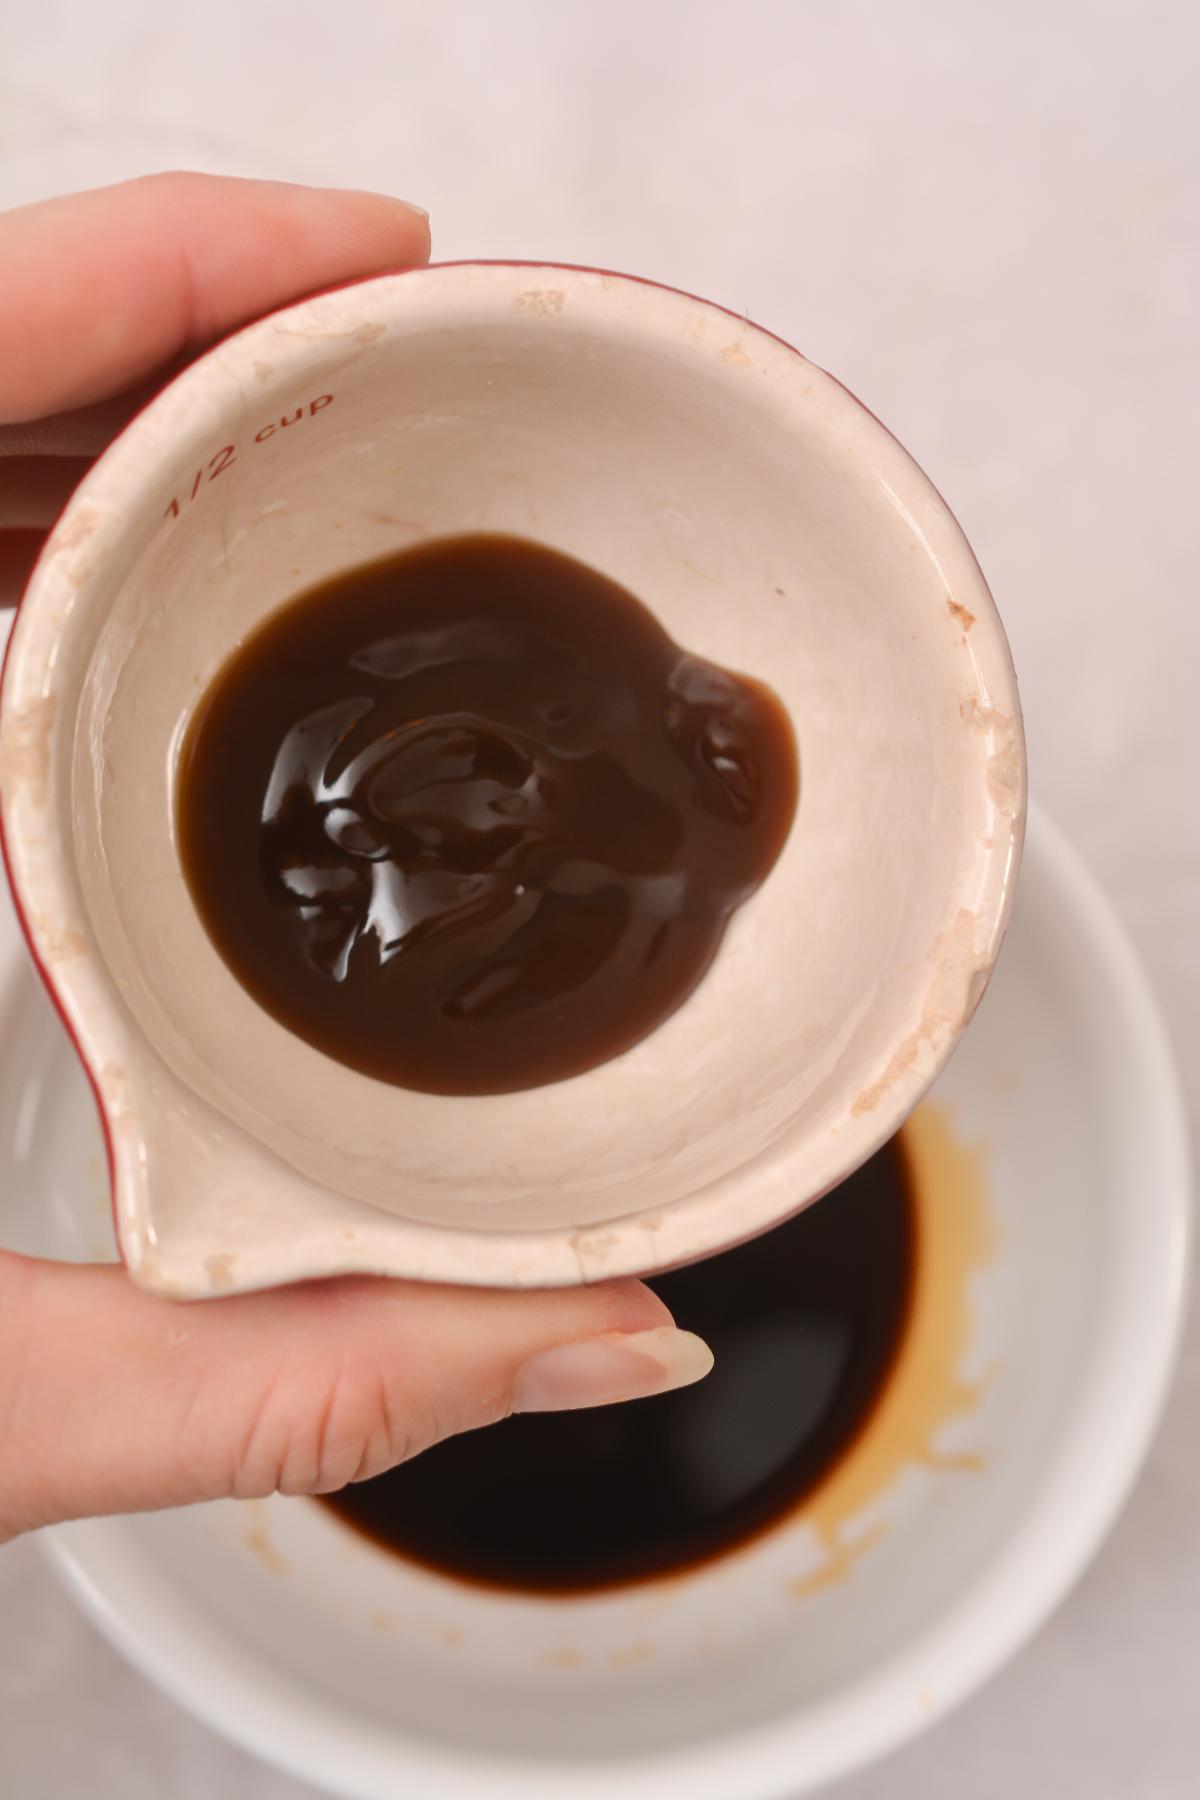 A person holding a bowl of oyster sauce.